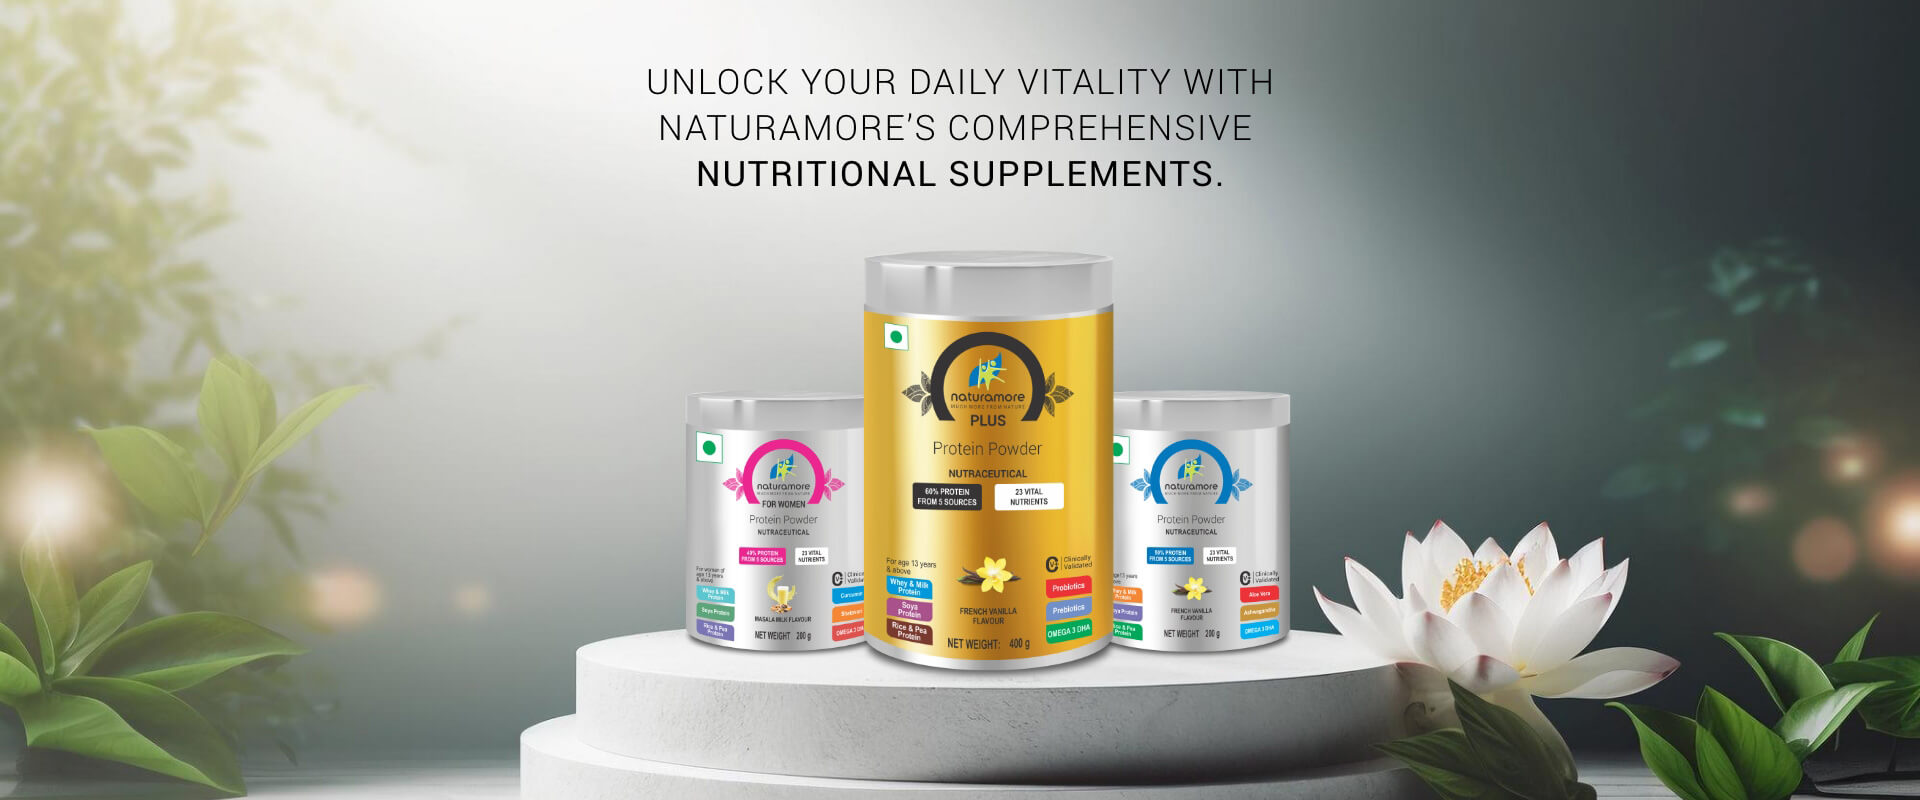 banner-daily-nutrition